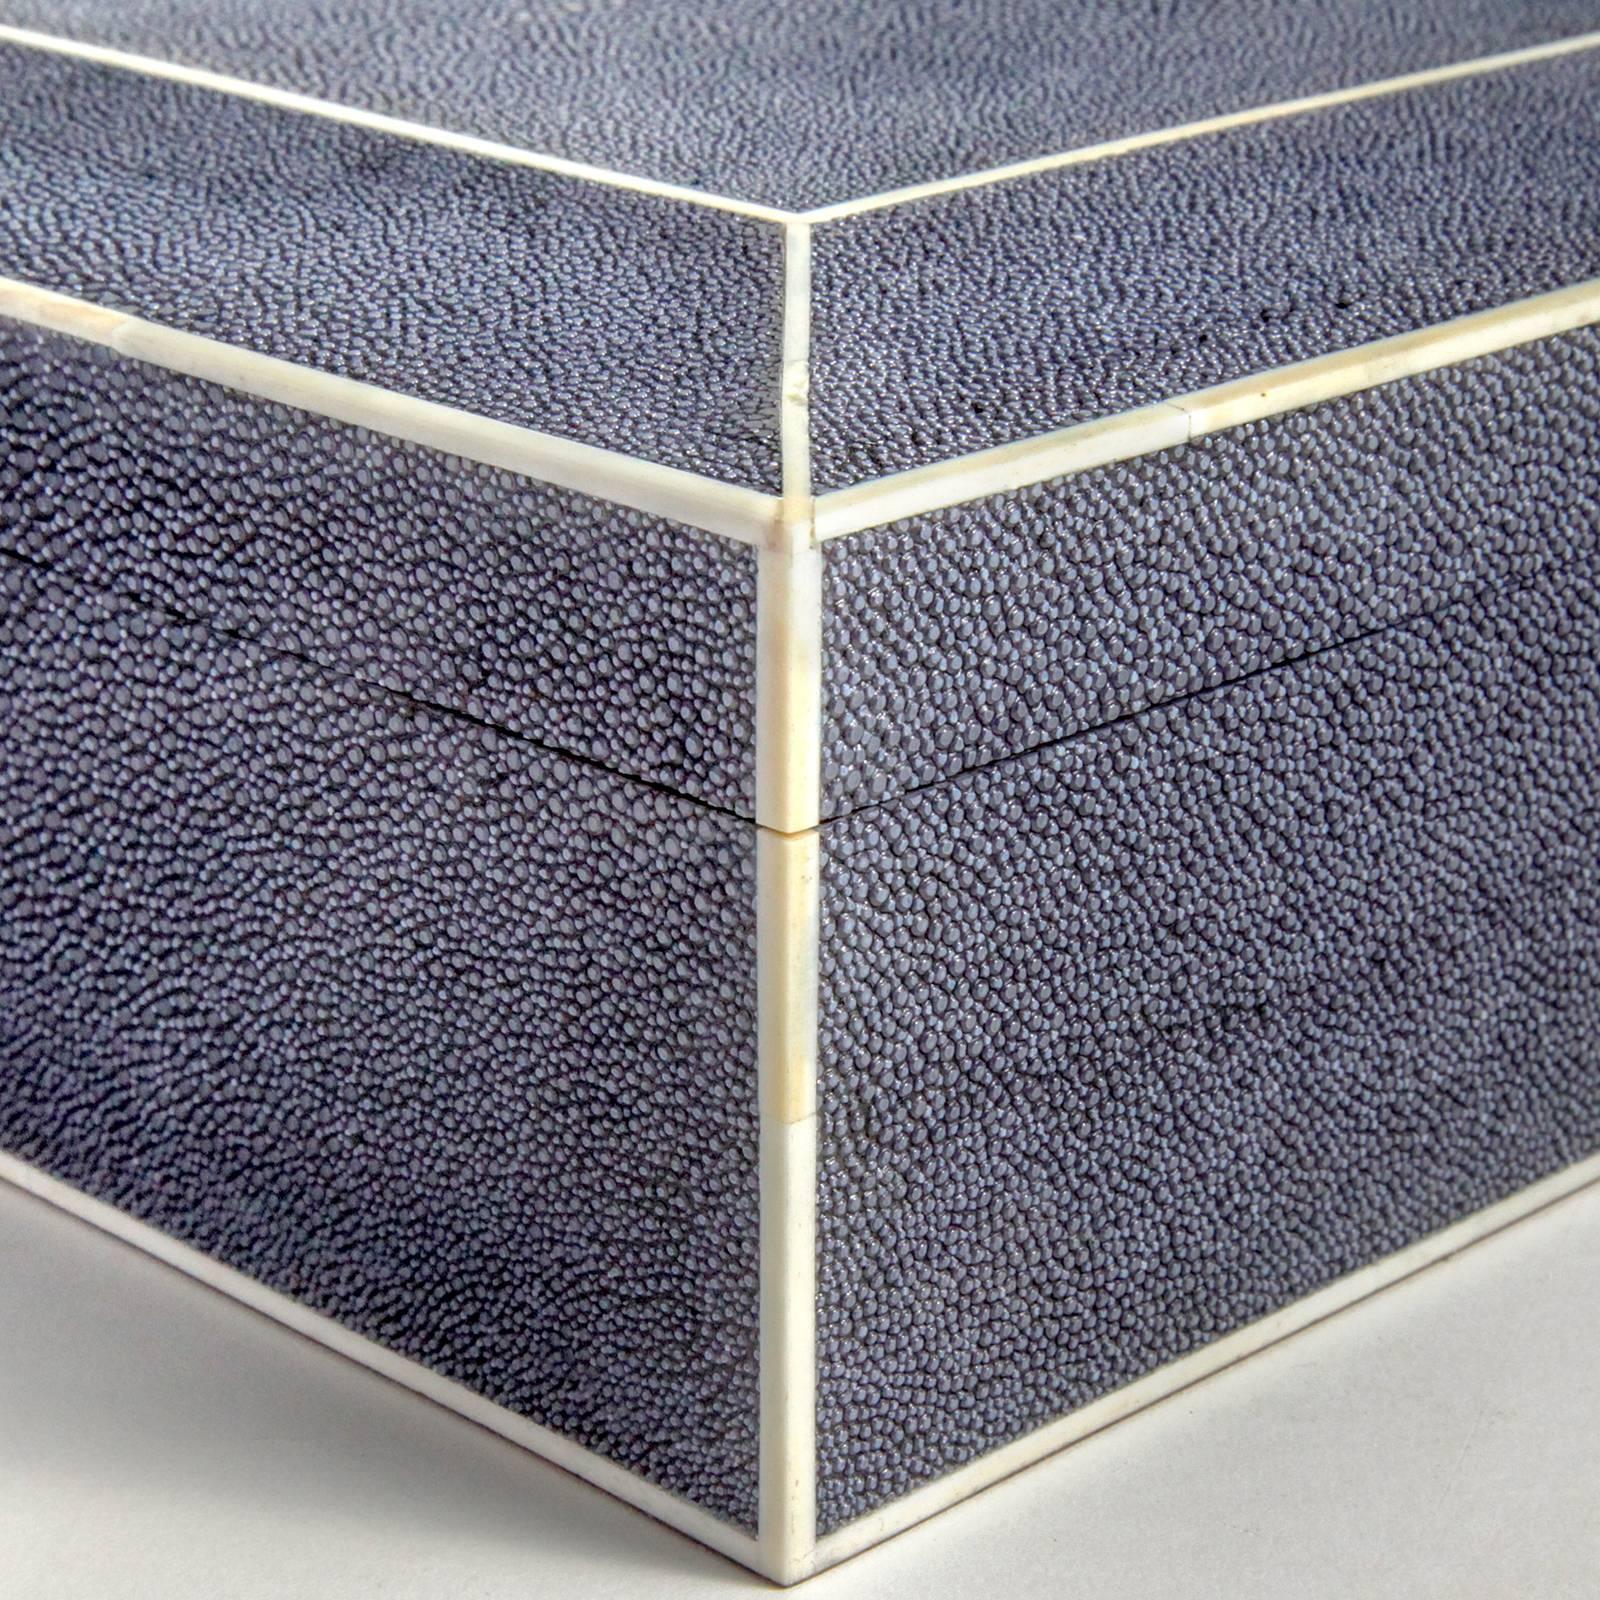 Handcrafted jewelry box with fitted top in tinted navy blue shagreen stingray. Beautifully edged in bone with bone detailing. Inside compartmentalized with beige suede fitted tray. Locks with key. Hand made in France.